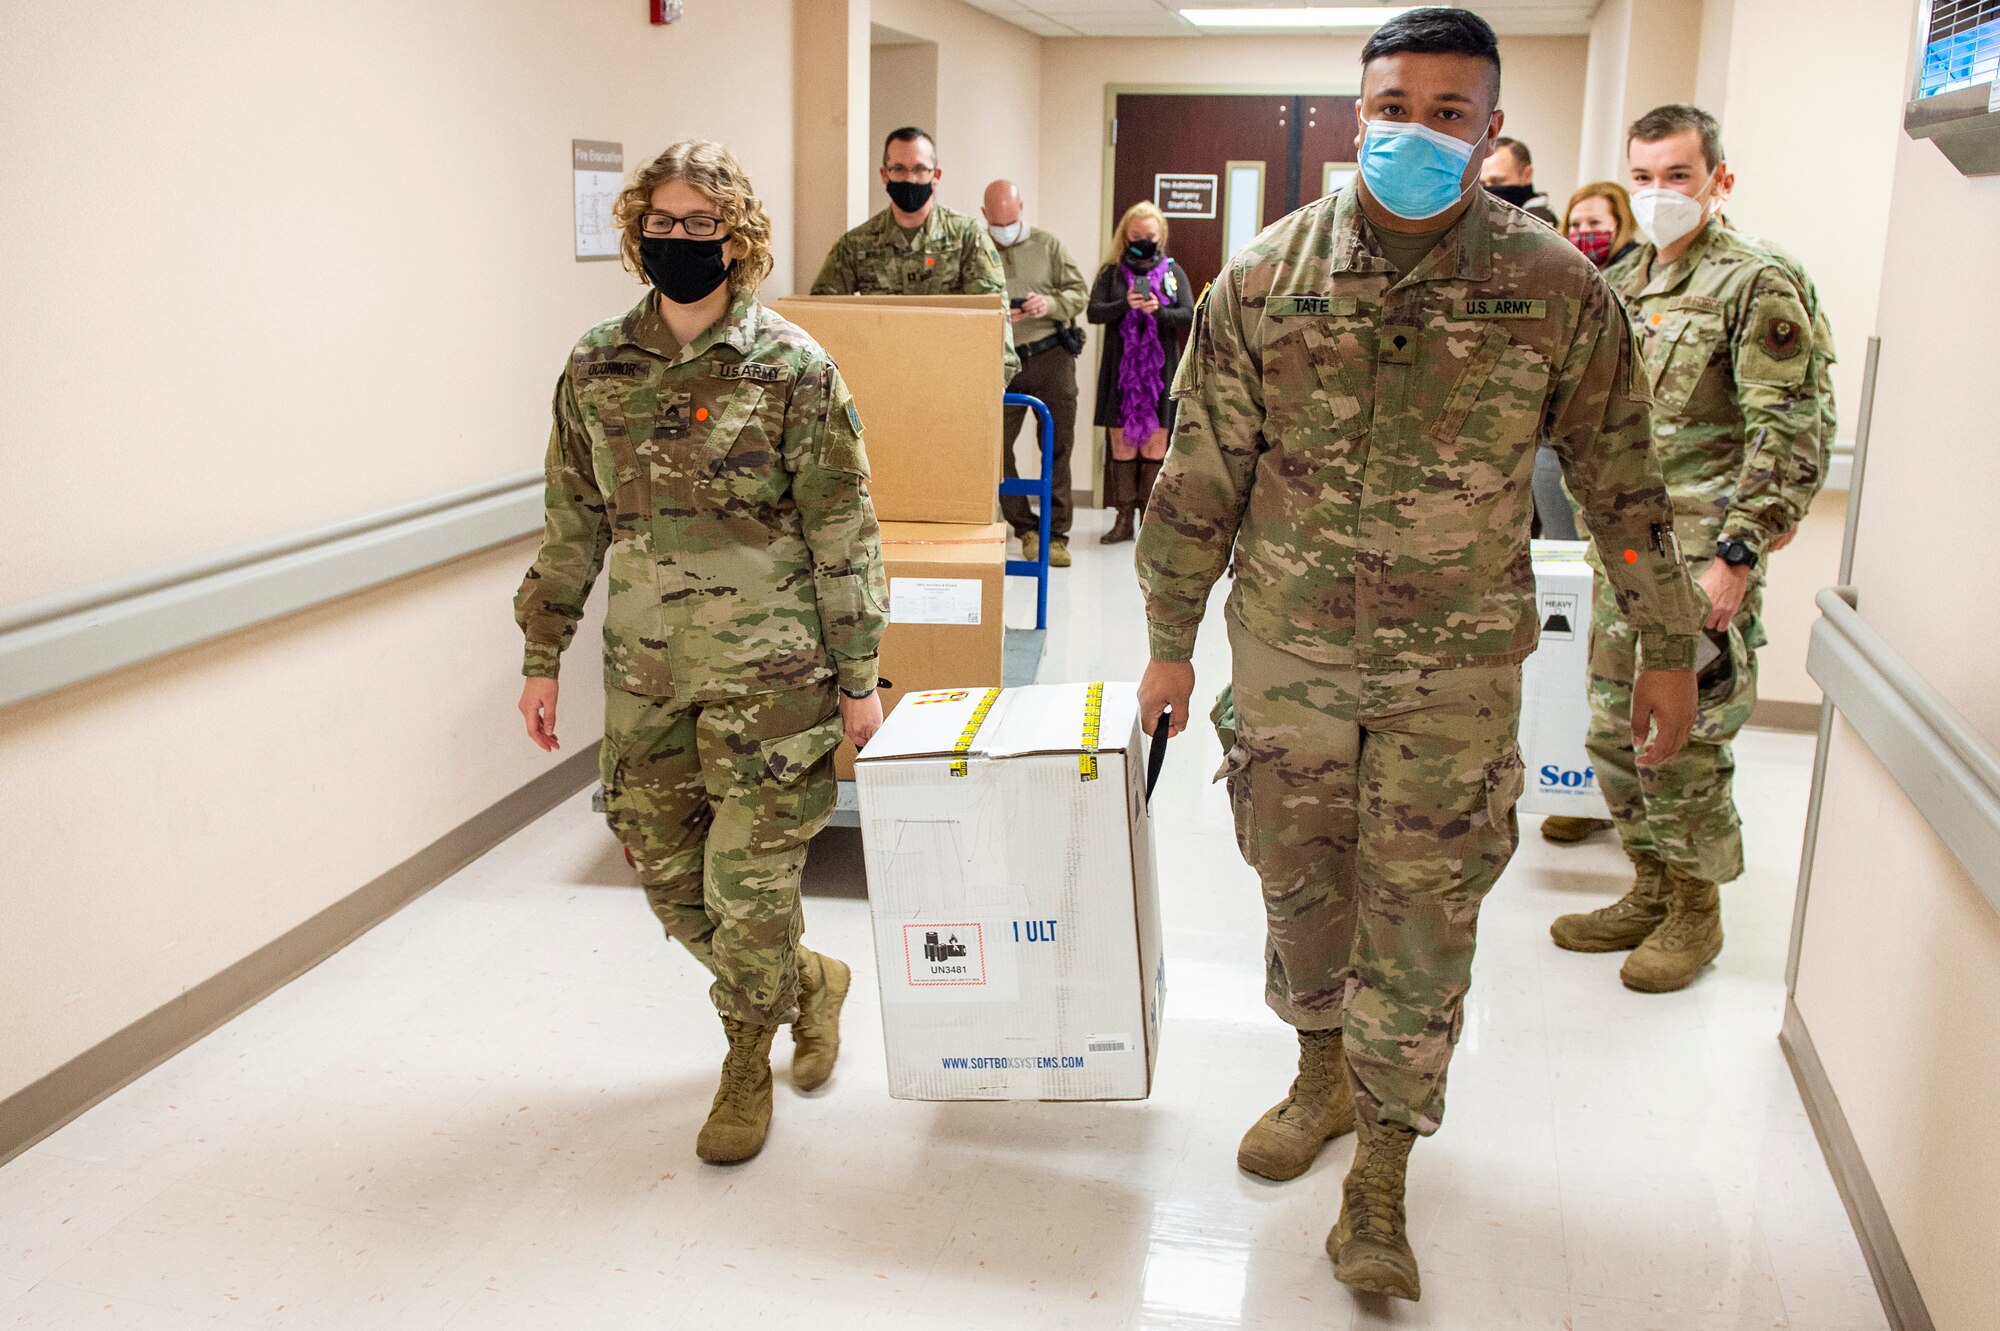 Cpl. Danielle O'Connor and Spc. Ryan Tate (right) quickly move boxes containing COVID-19 vaccinations to vehicles the Guard members will use to transport the vaccines to sites across the state, Dec. 15, 2020.

These are the first two boxes of vaccines to be distributed from one of five centralized hubs supporting 11 satellite locations across Oklahoma. The Guardsmen will be using Oklahoma State Department of Health vehicles to transport the vaccines to the satellite locations with an escort from the Oklahoma Highway Patrol. (Oklahoma National Guard photo by Anthony Jones)